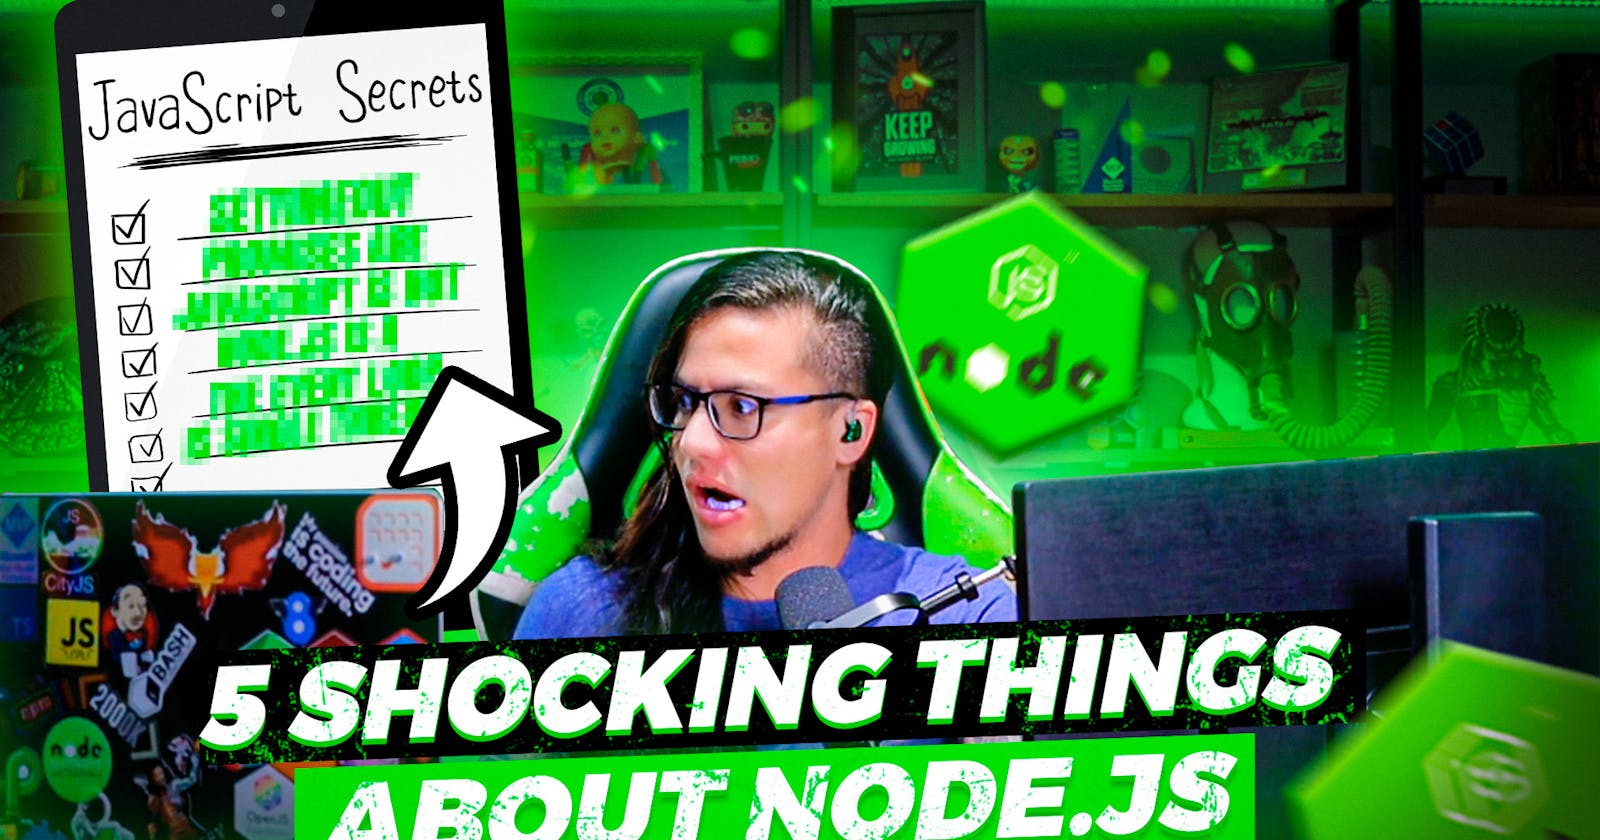 5 Shocking Things About Node.js That You Thought You Knew But Didn't!